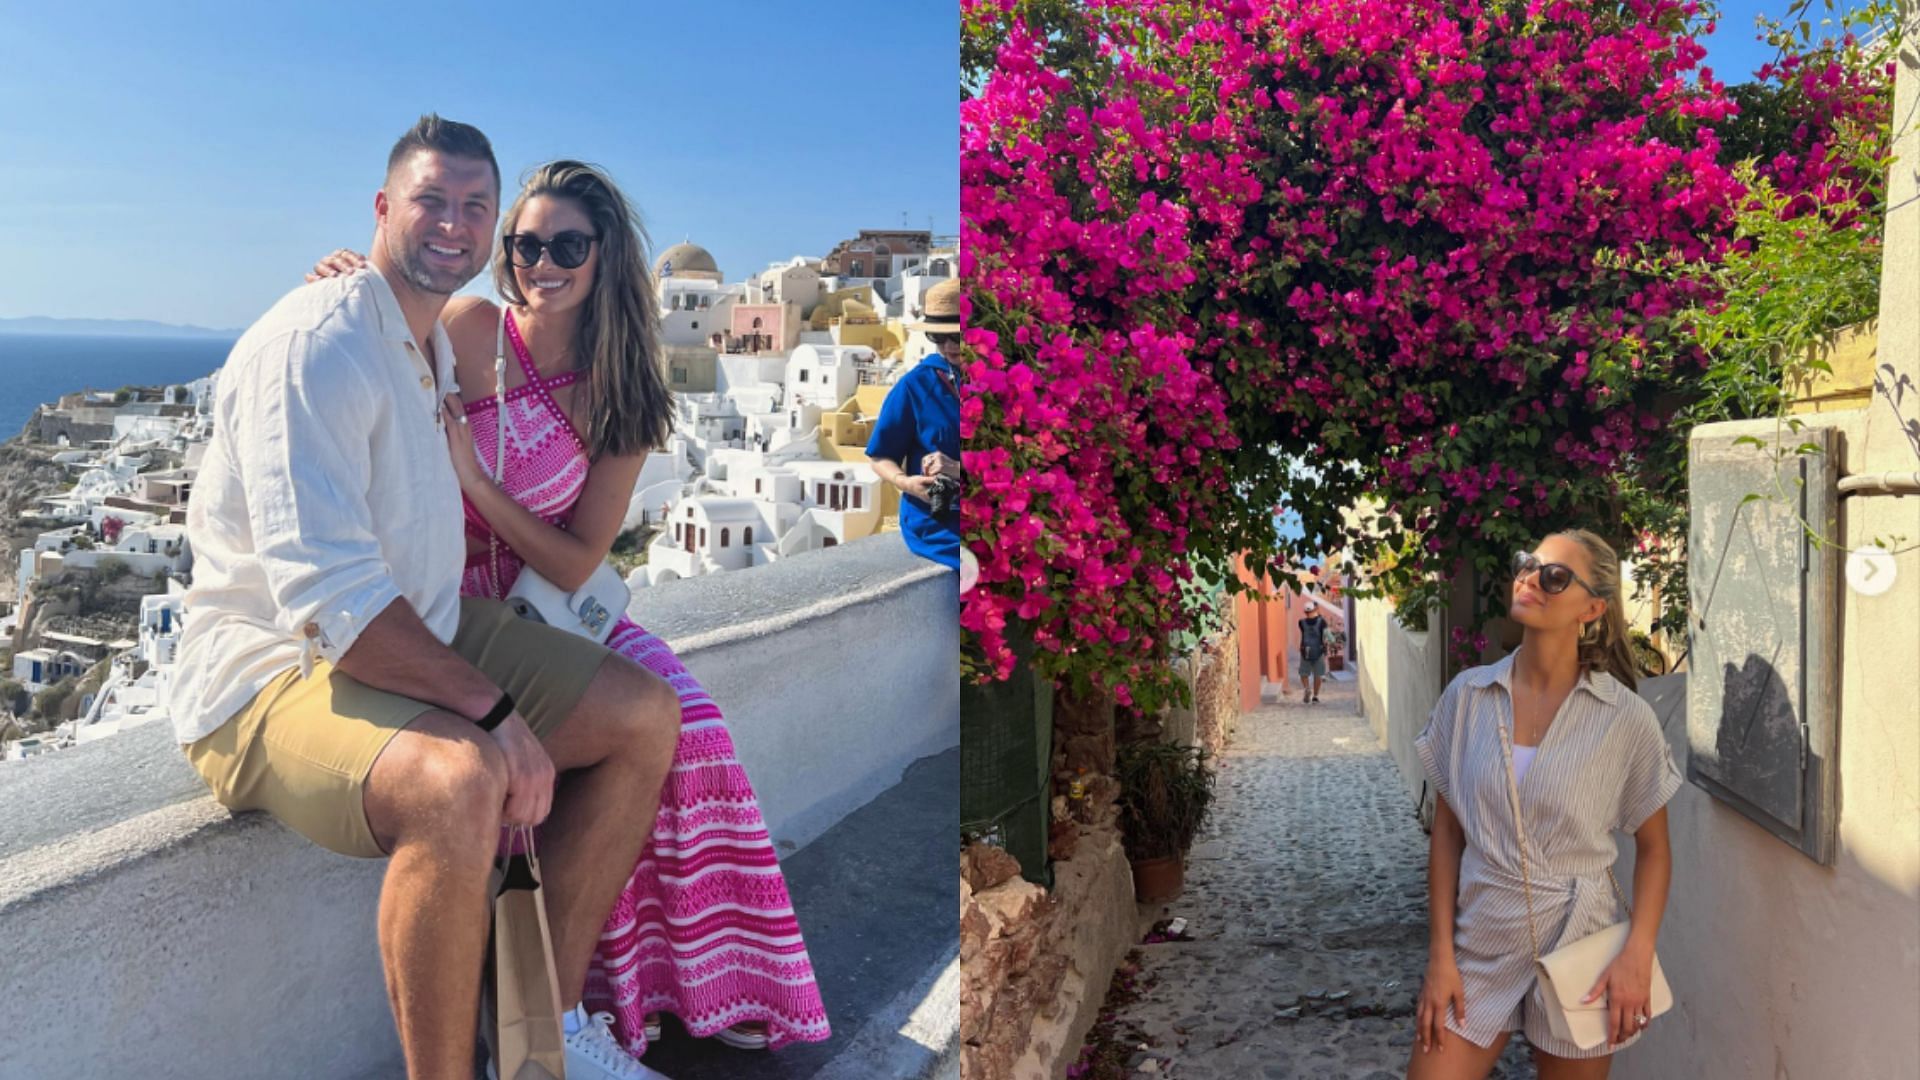 Tim Tebow and wife found their perfect holiday spot. 